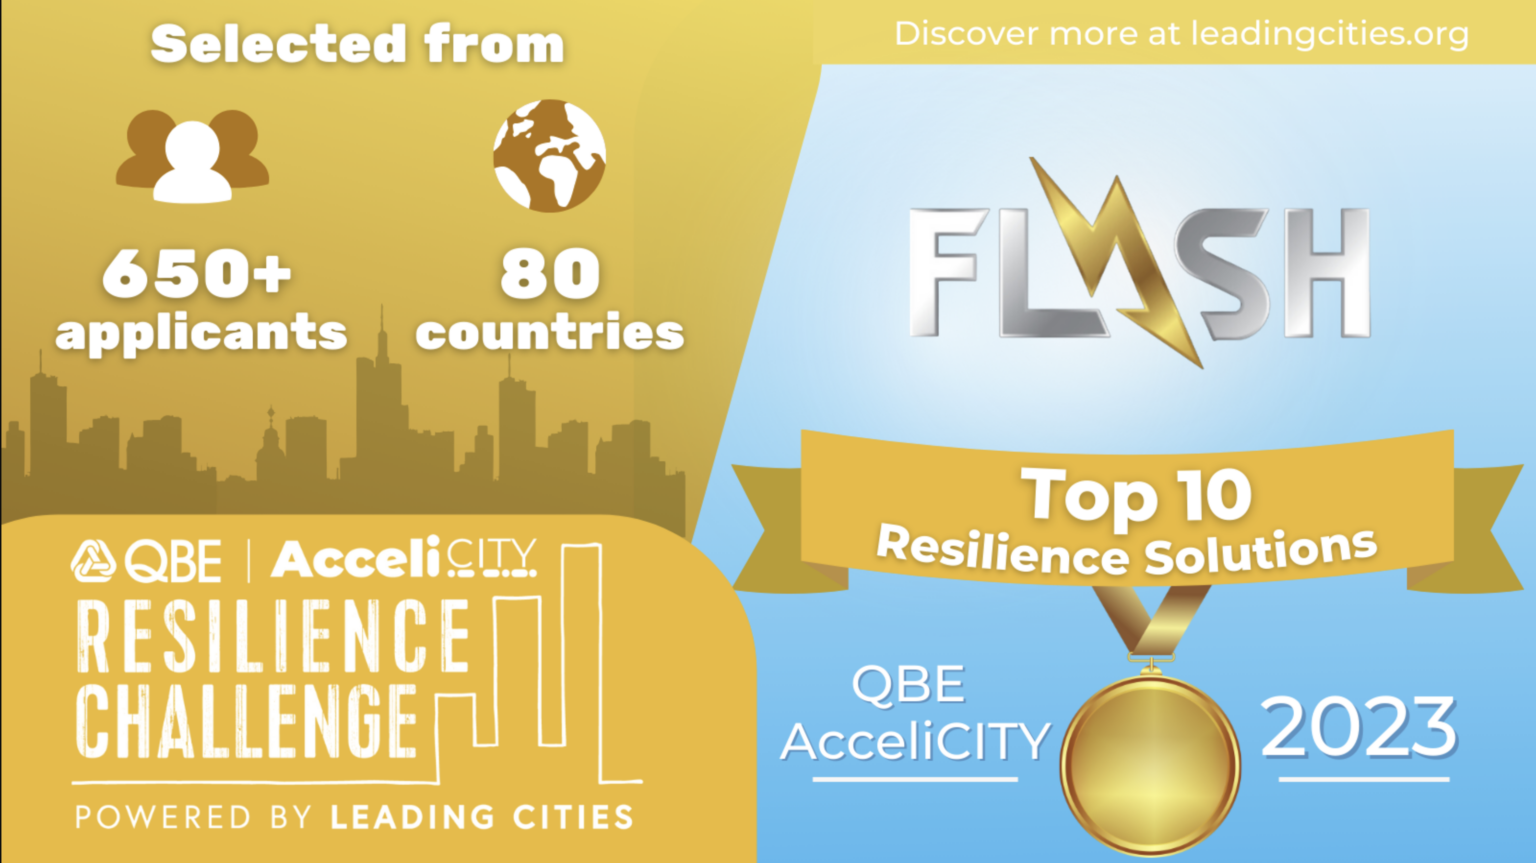 Top 5 finalist in the Accelicity Resilience Challenge 2023